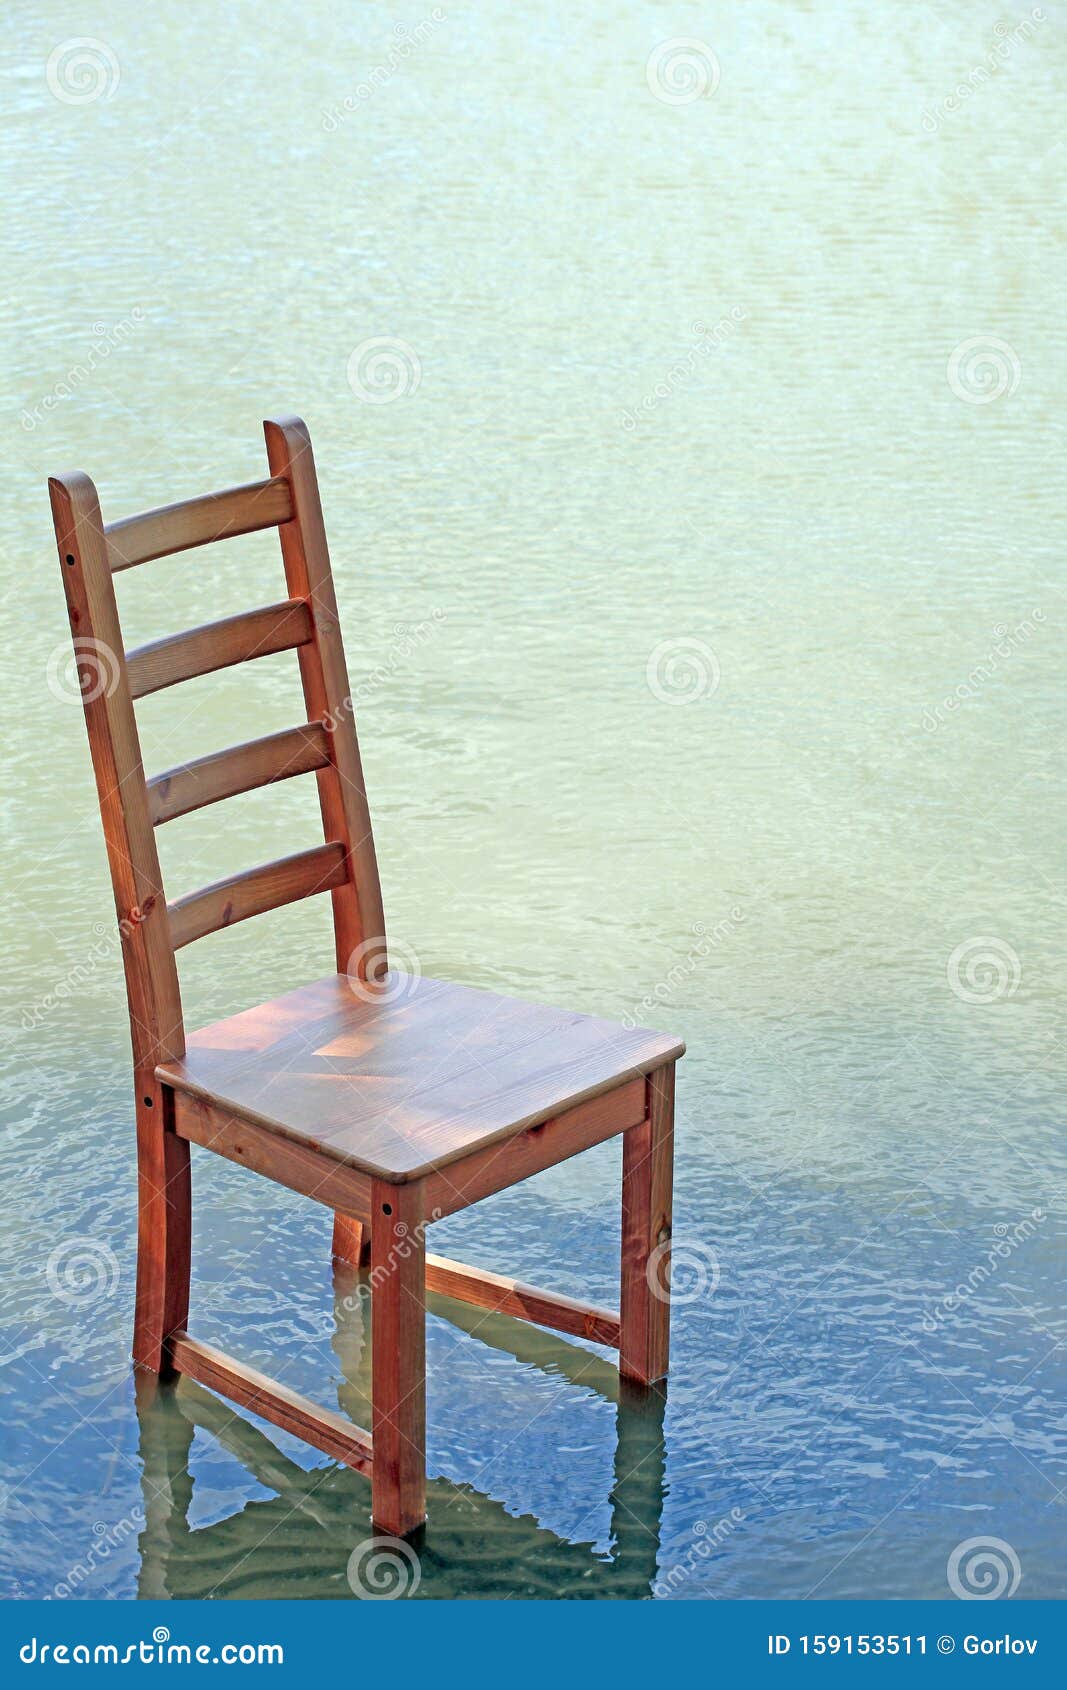 20 Chair Pictures  Download Free Images on Unsplash